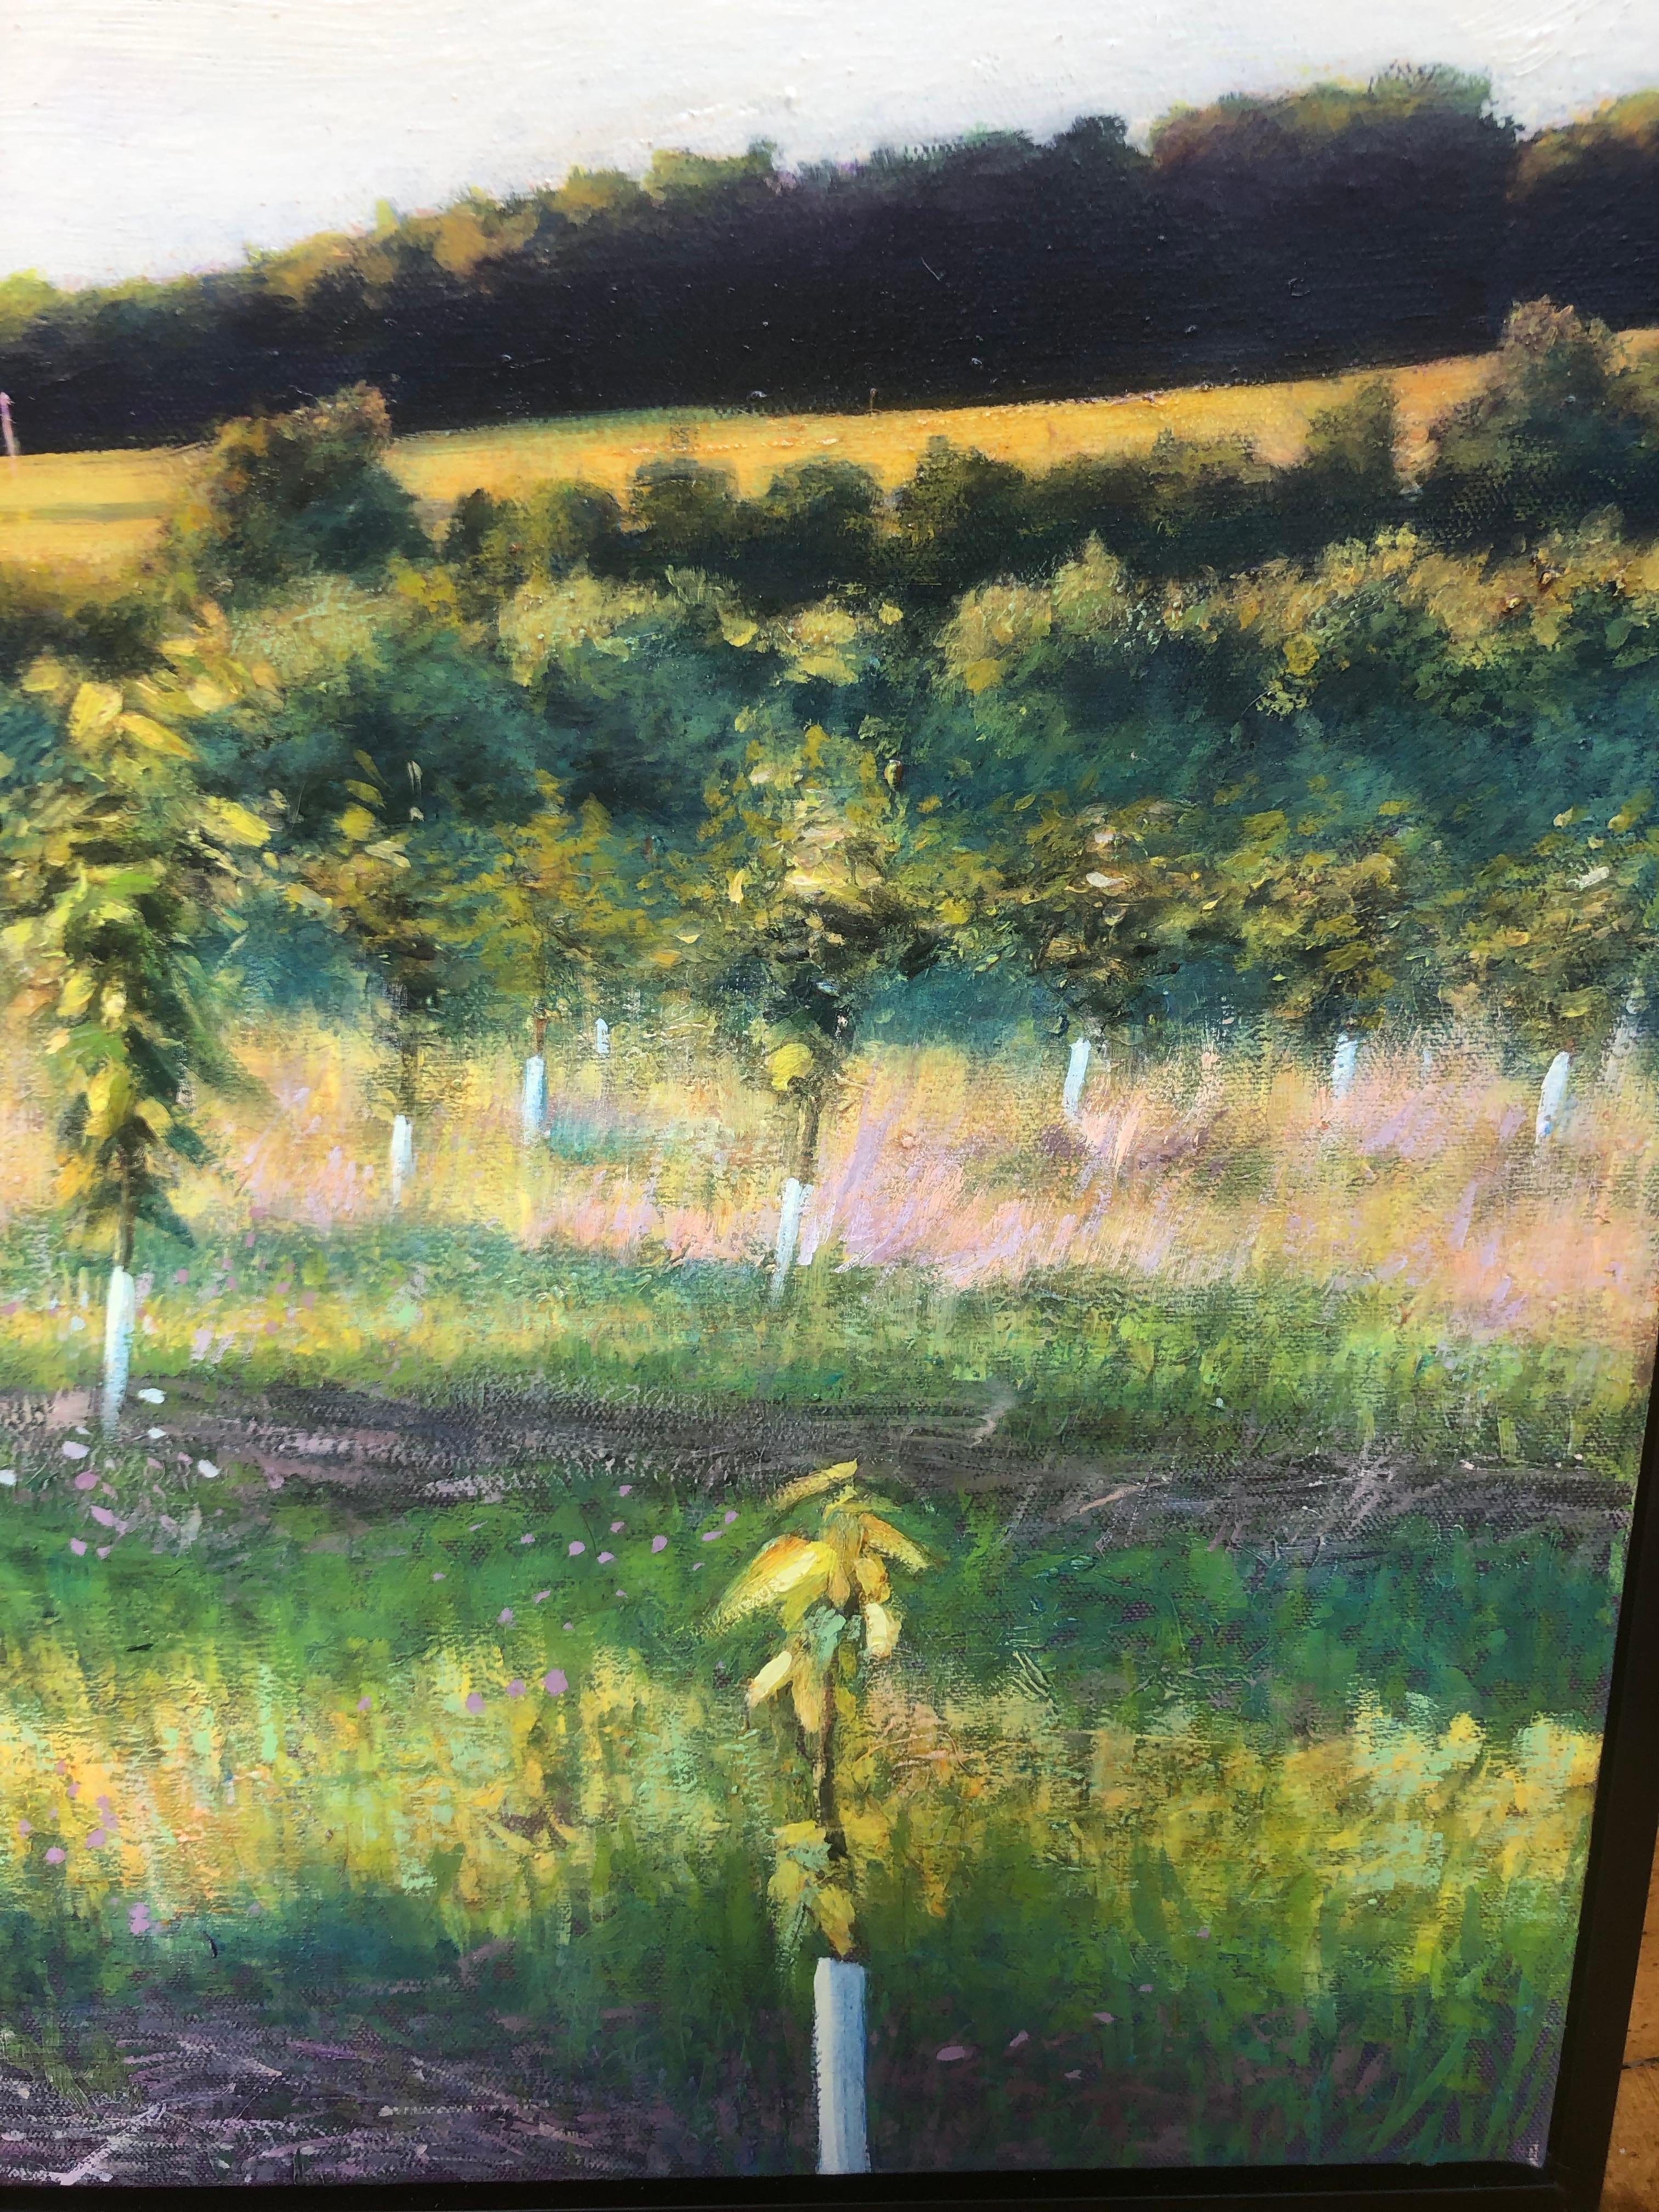 This painting captures a young orchard bathed in bright light.  The abundance of green and yellow color evokes Spring renewal while the remoteness of the scene brings about peaceful contemplation.  Deft handling of paint and loose brushwork are